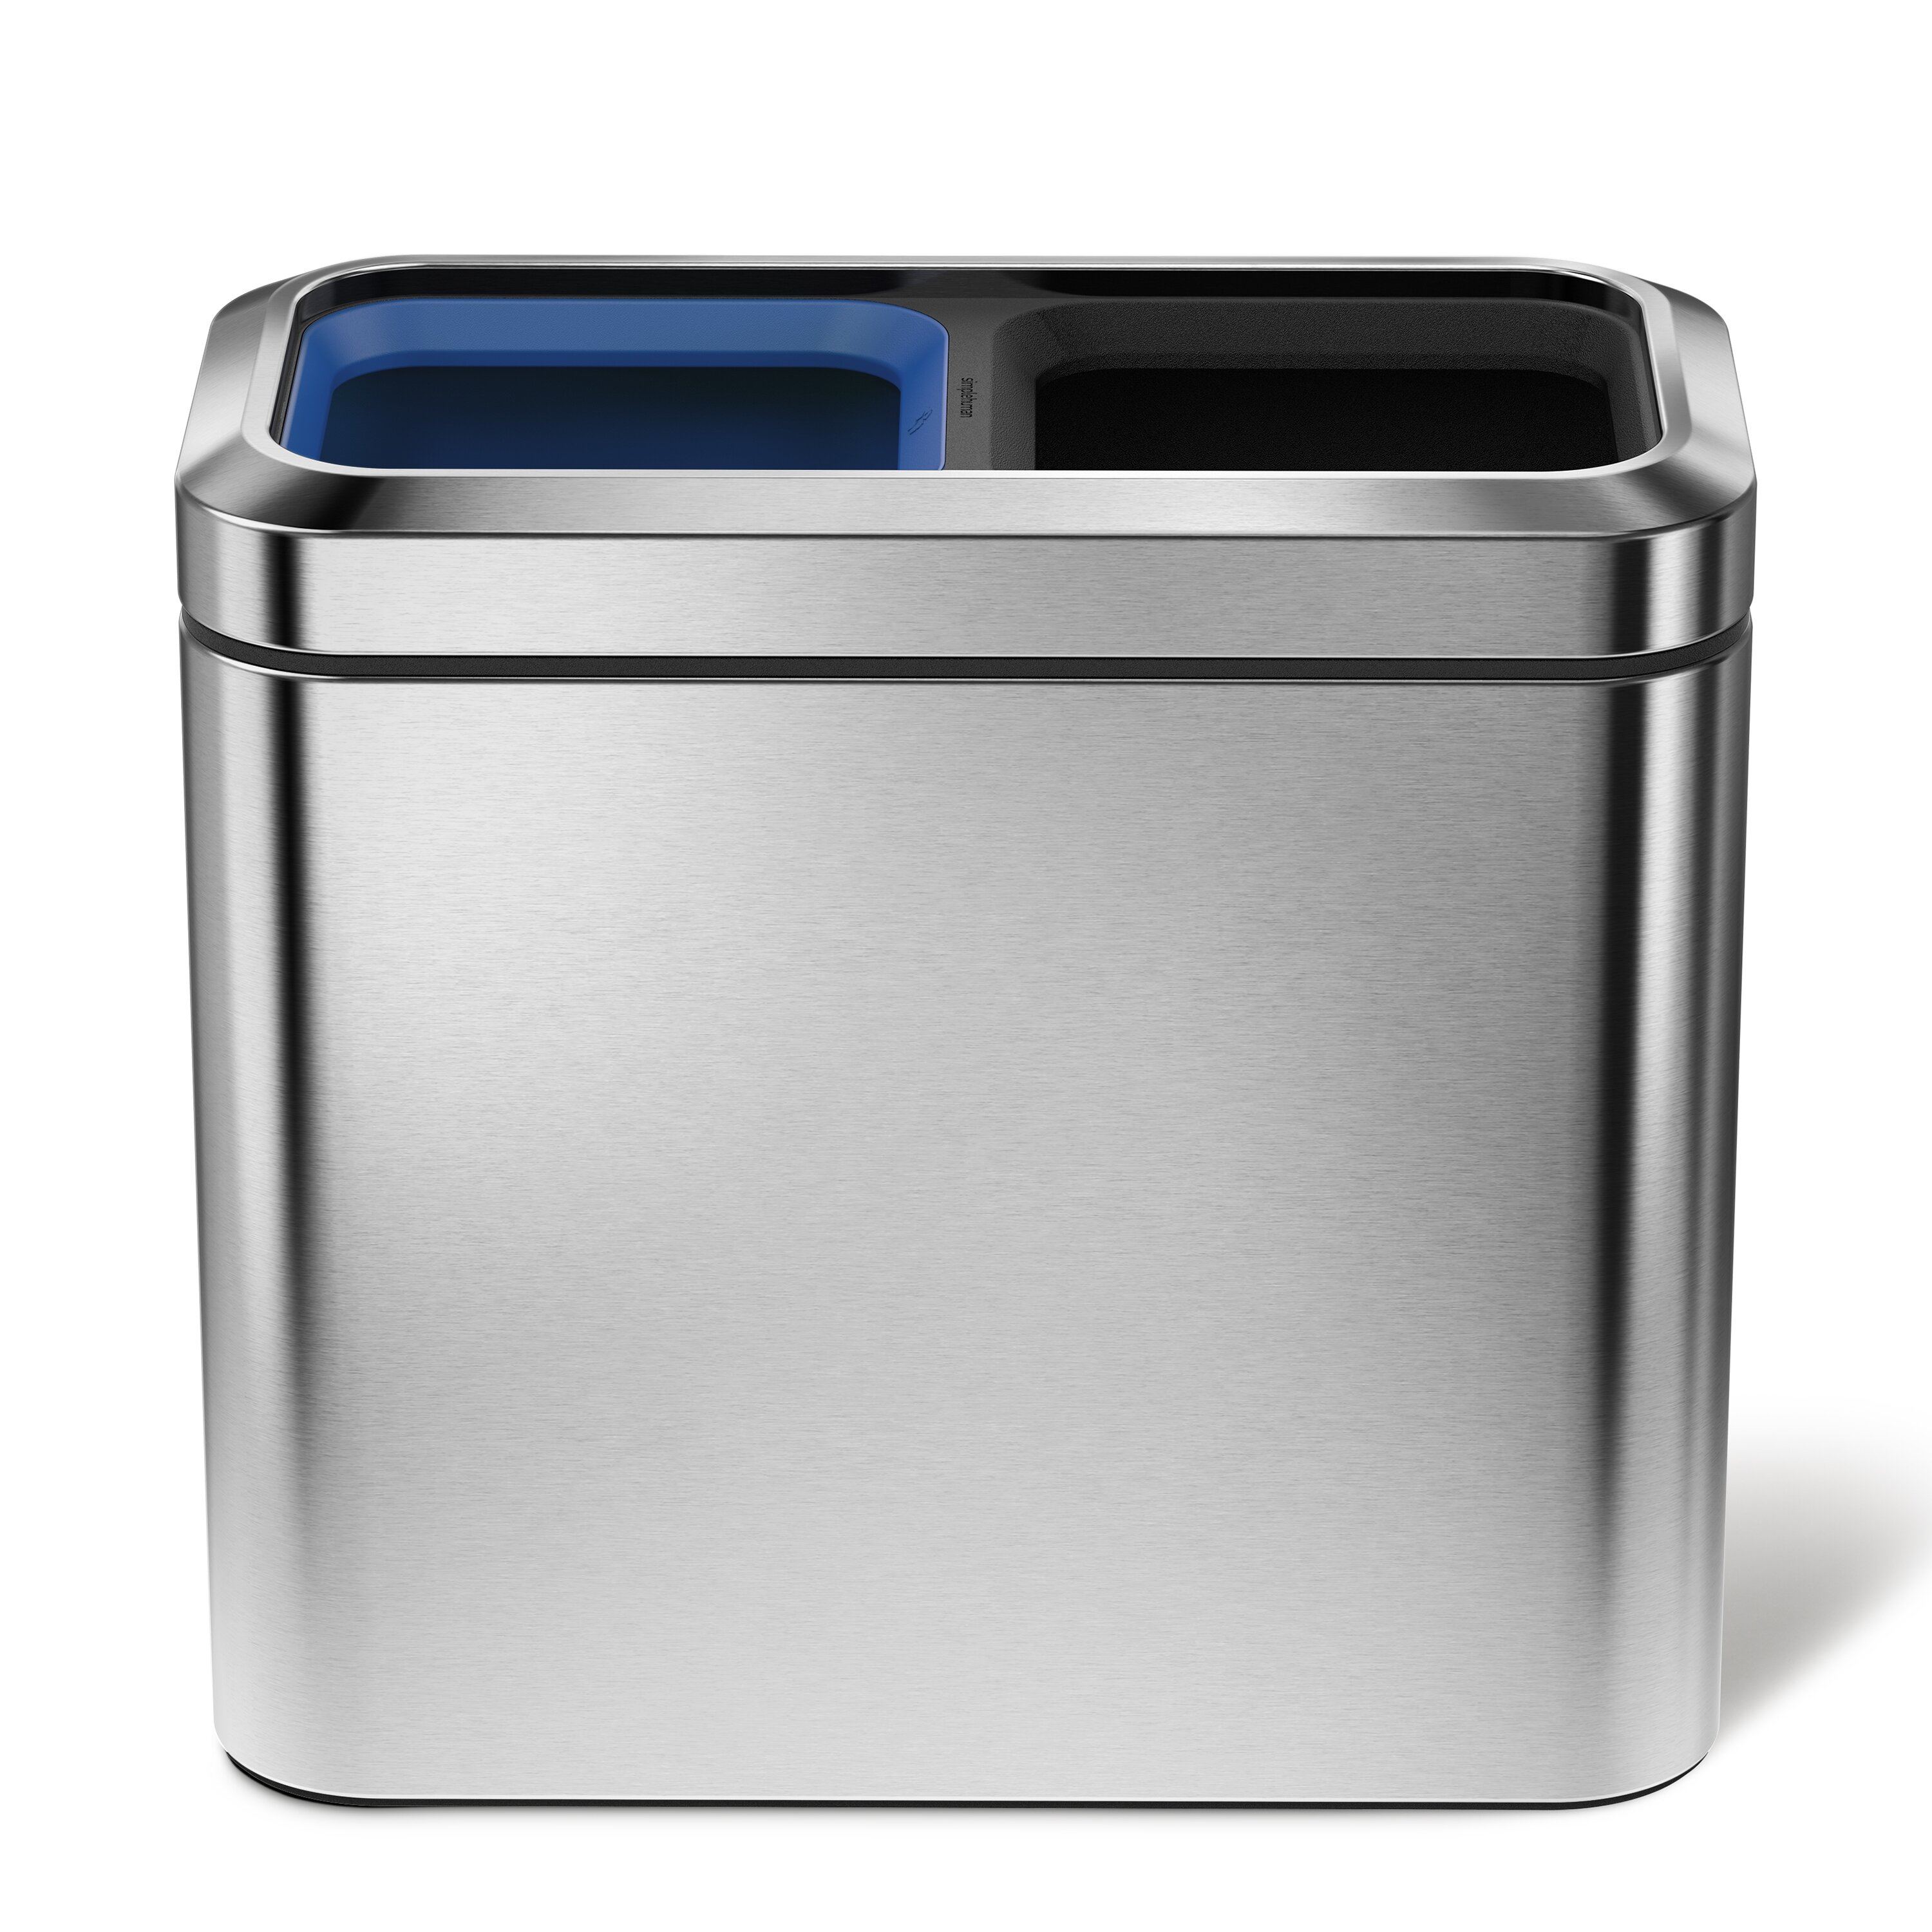 An Honest Review of simplehuman's Dual Compartment Trash Can